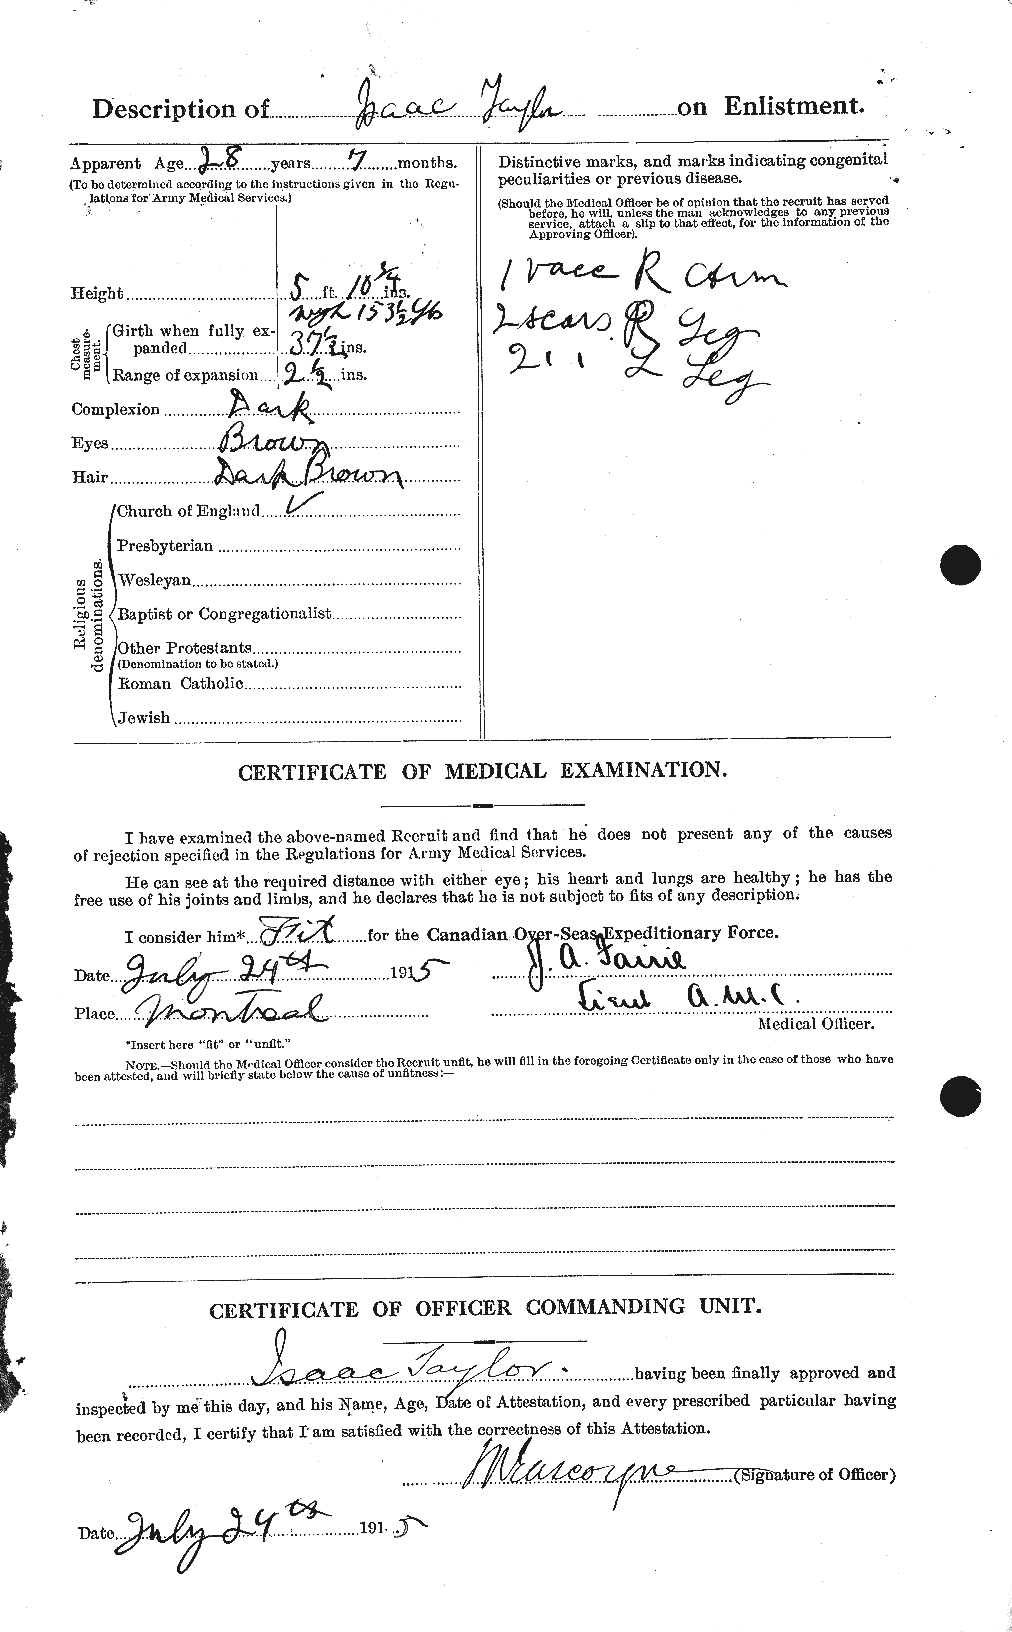 Personnel Records of the First World War - CEF 626628b